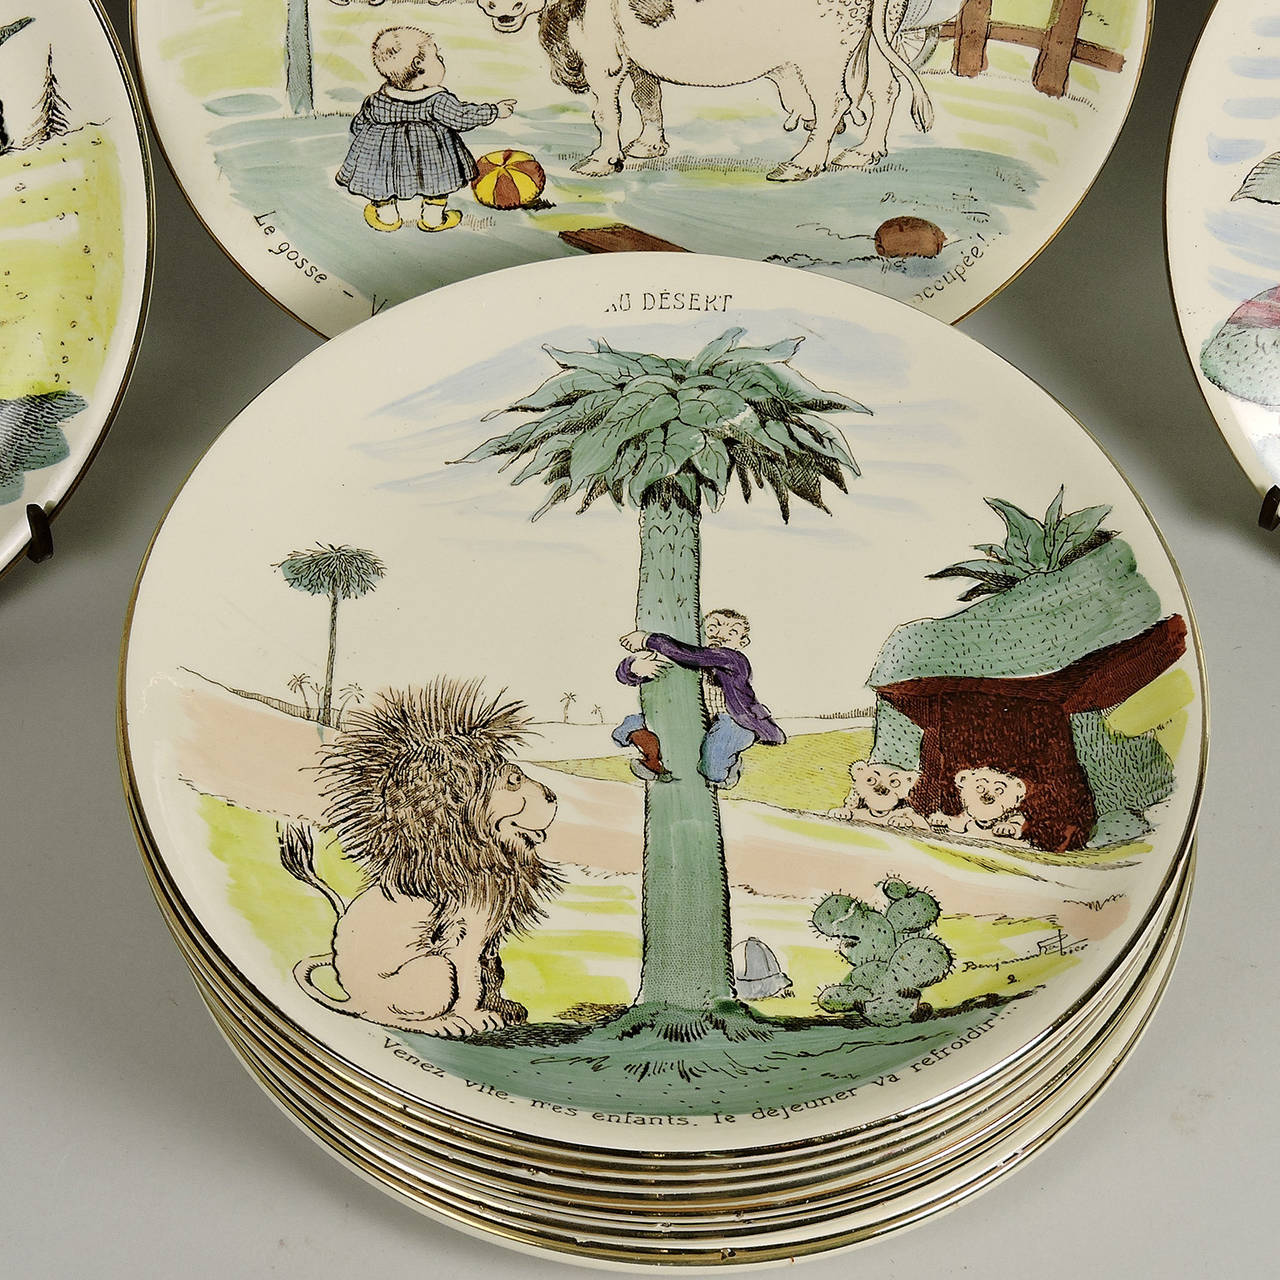 Early 20th century set of 12 comedic polychrome ceramic lunch plates by French designer and cartoonist, Benjamin Rabier (1864-1939), manufactured by Sarreguemmes, Paris. It is rare to find a complete set in good condition in color. 
Diameter: 7 3/4